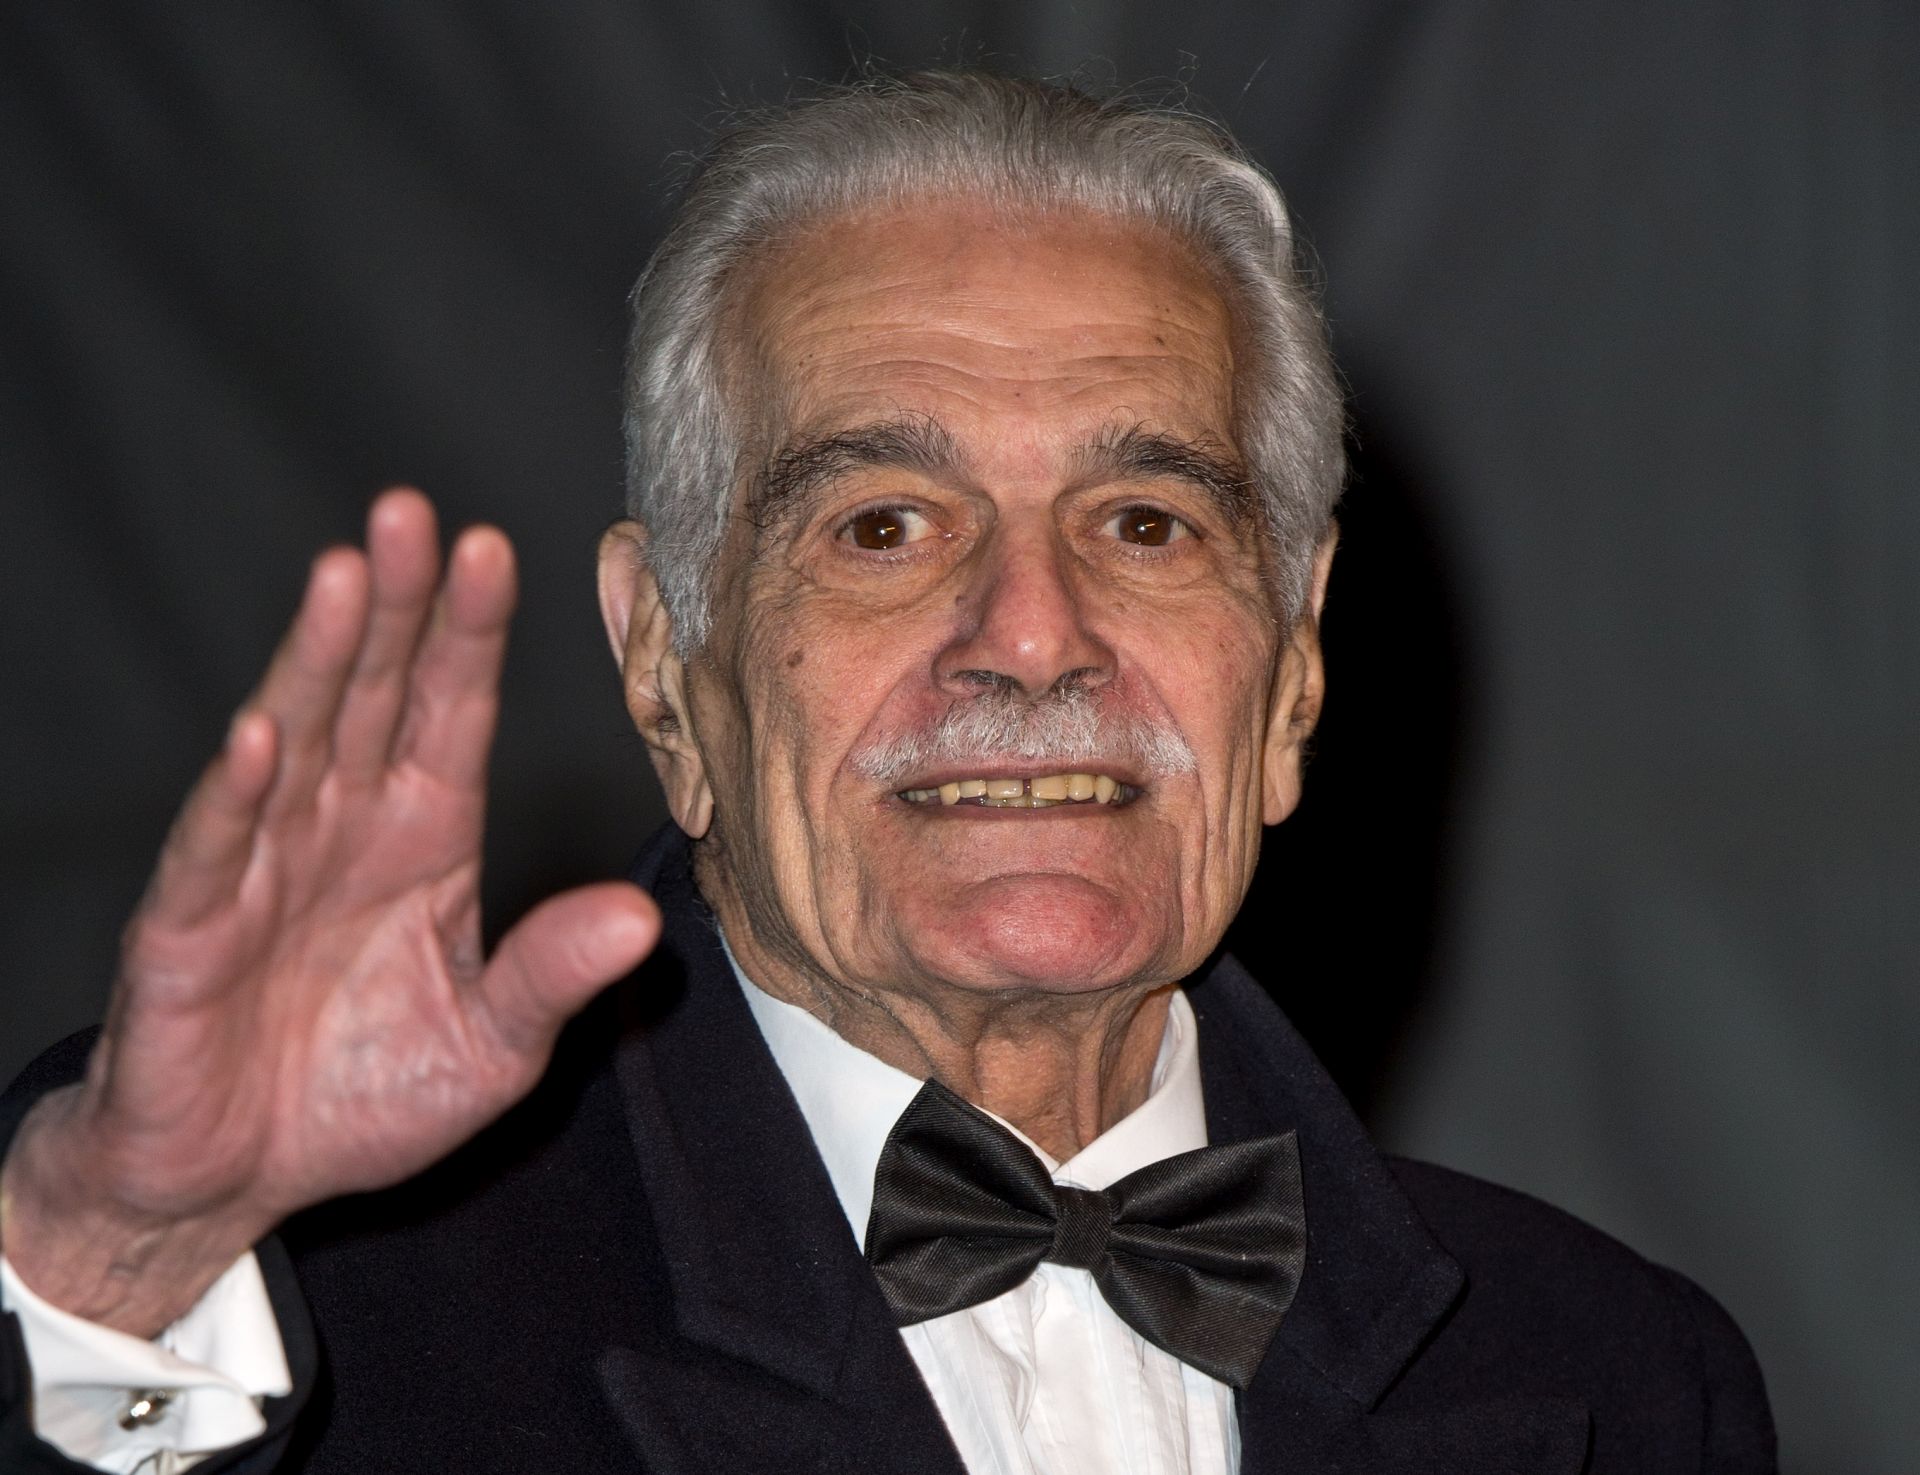 LONDON, UNITED KINGDOM - NOVEMBER 14: Omar Sharif arrives at the Chain Of Hope Annual Ball at Supernova, Embankment Gardens on November 14, 2013 in London, England. (Photo by Zak Hussein/Getty Images)